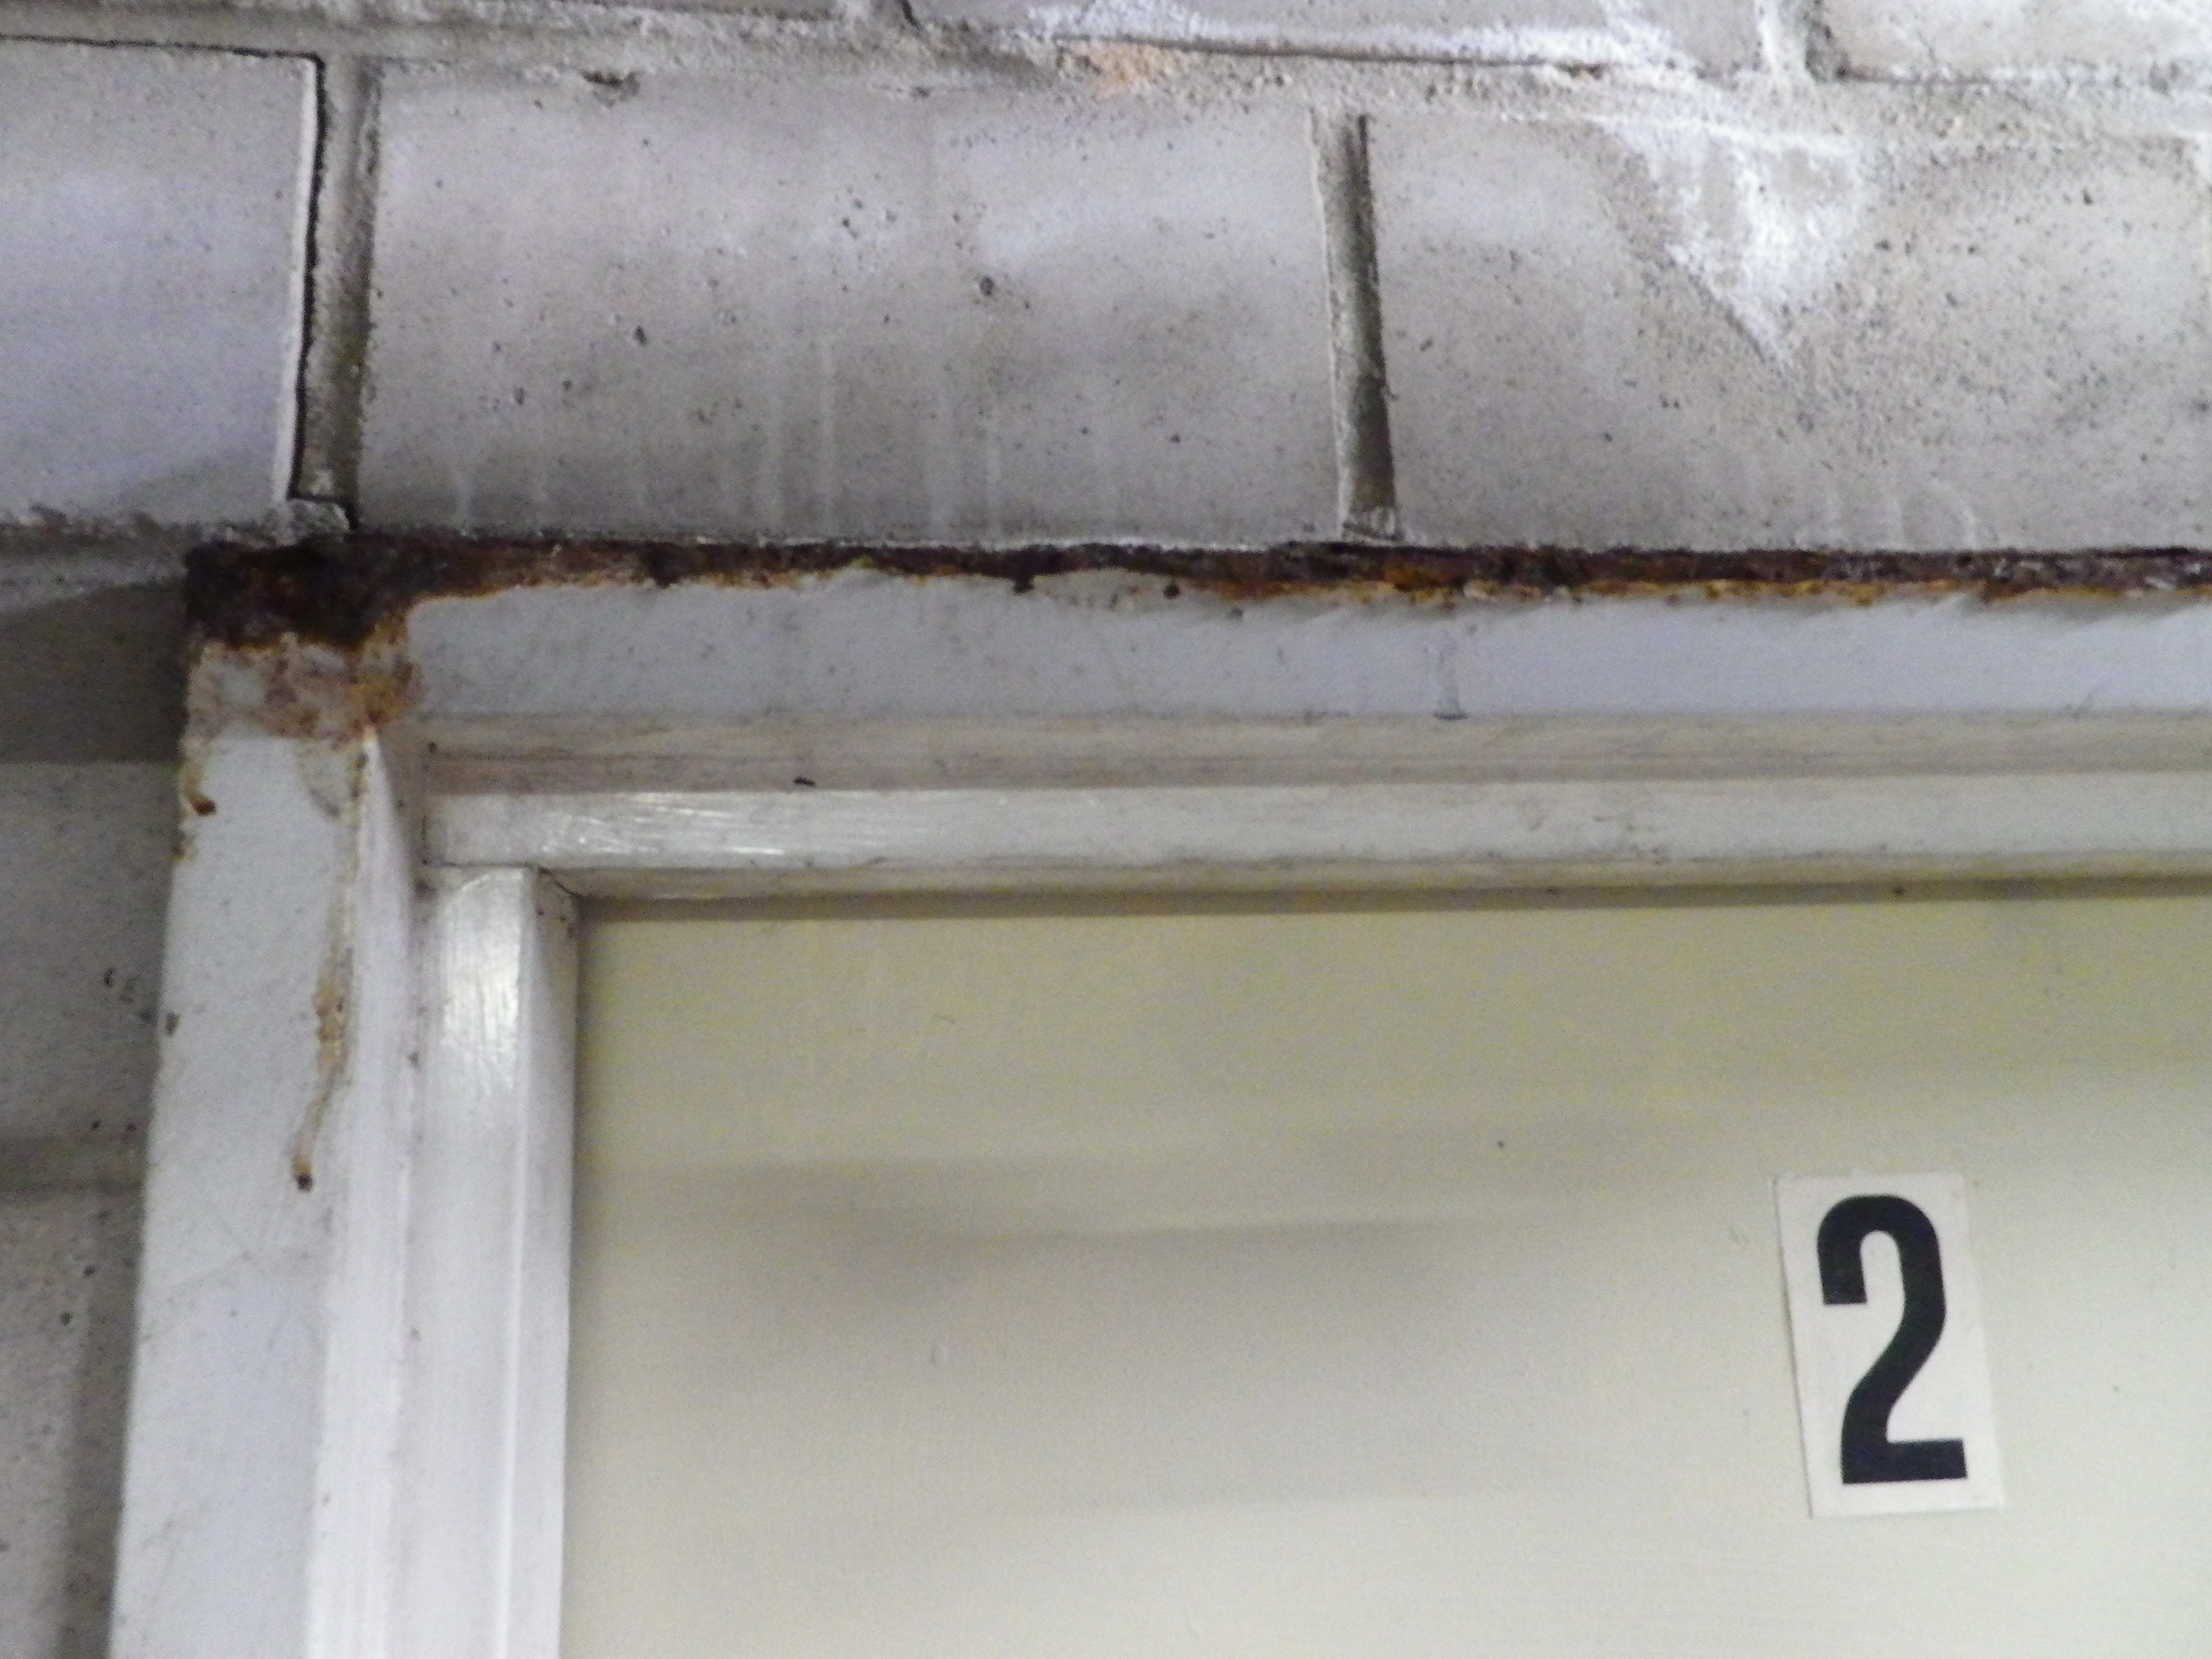 SP52948-Block-A-external-fire-door-2-rusted-frame-due-to-water-damages-photo-1-16Apr2021.jpg